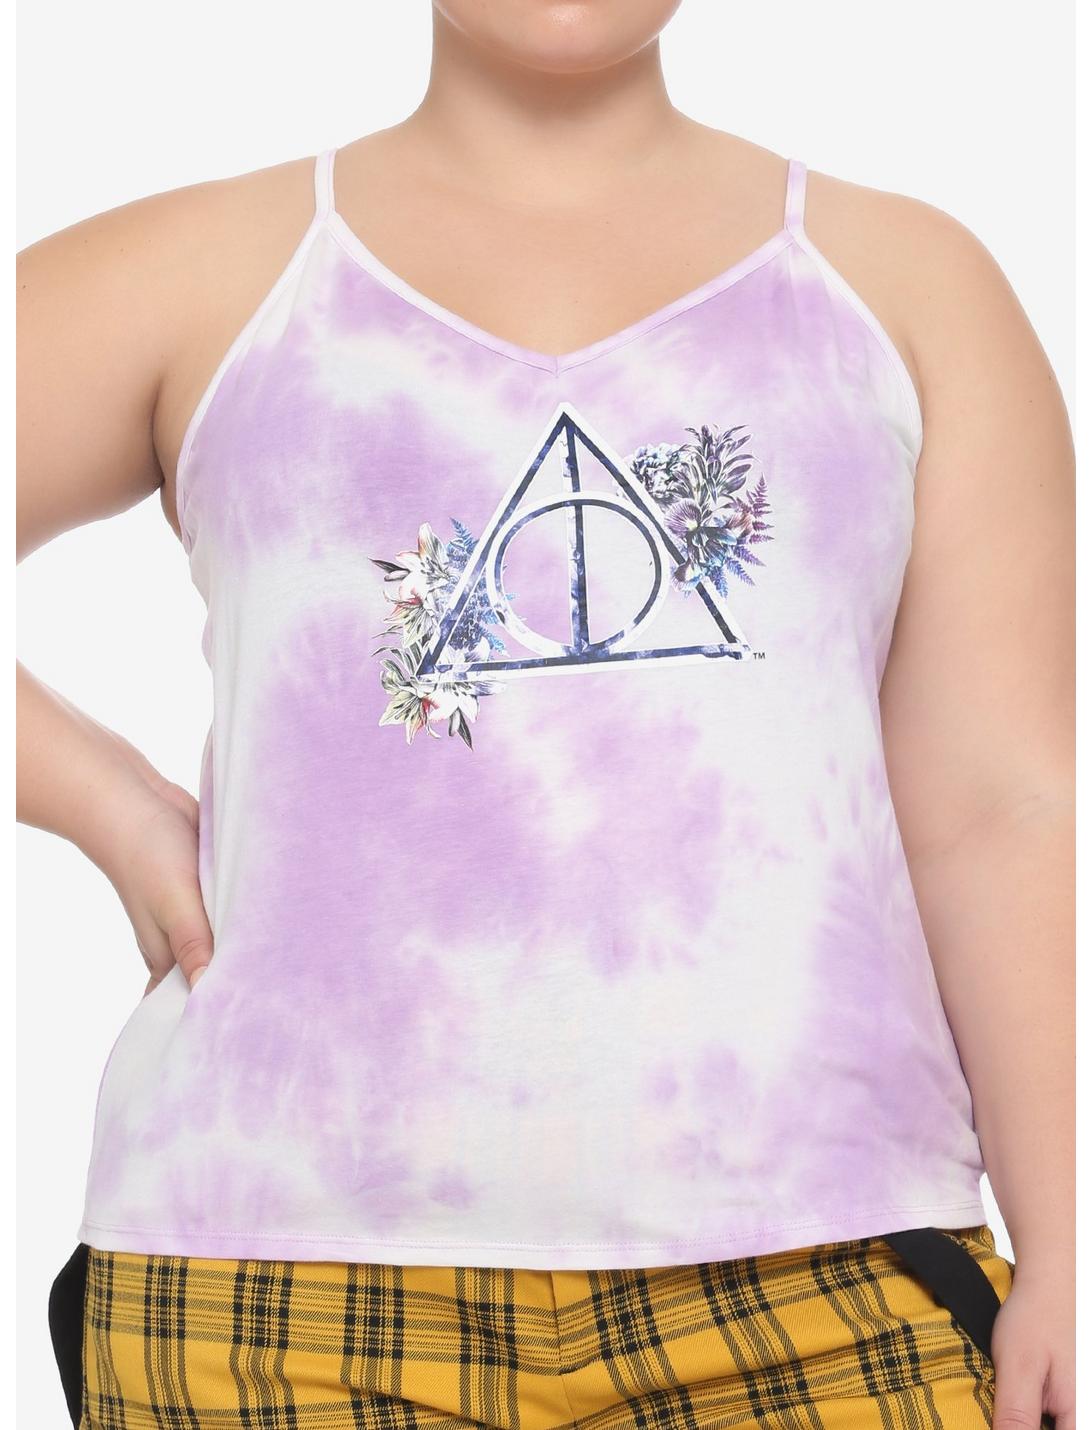 Harry Potter Deathly Hallows Floral Tie-Dye Girls Strappy Tank Top Plus Size, MULTI, hi-res